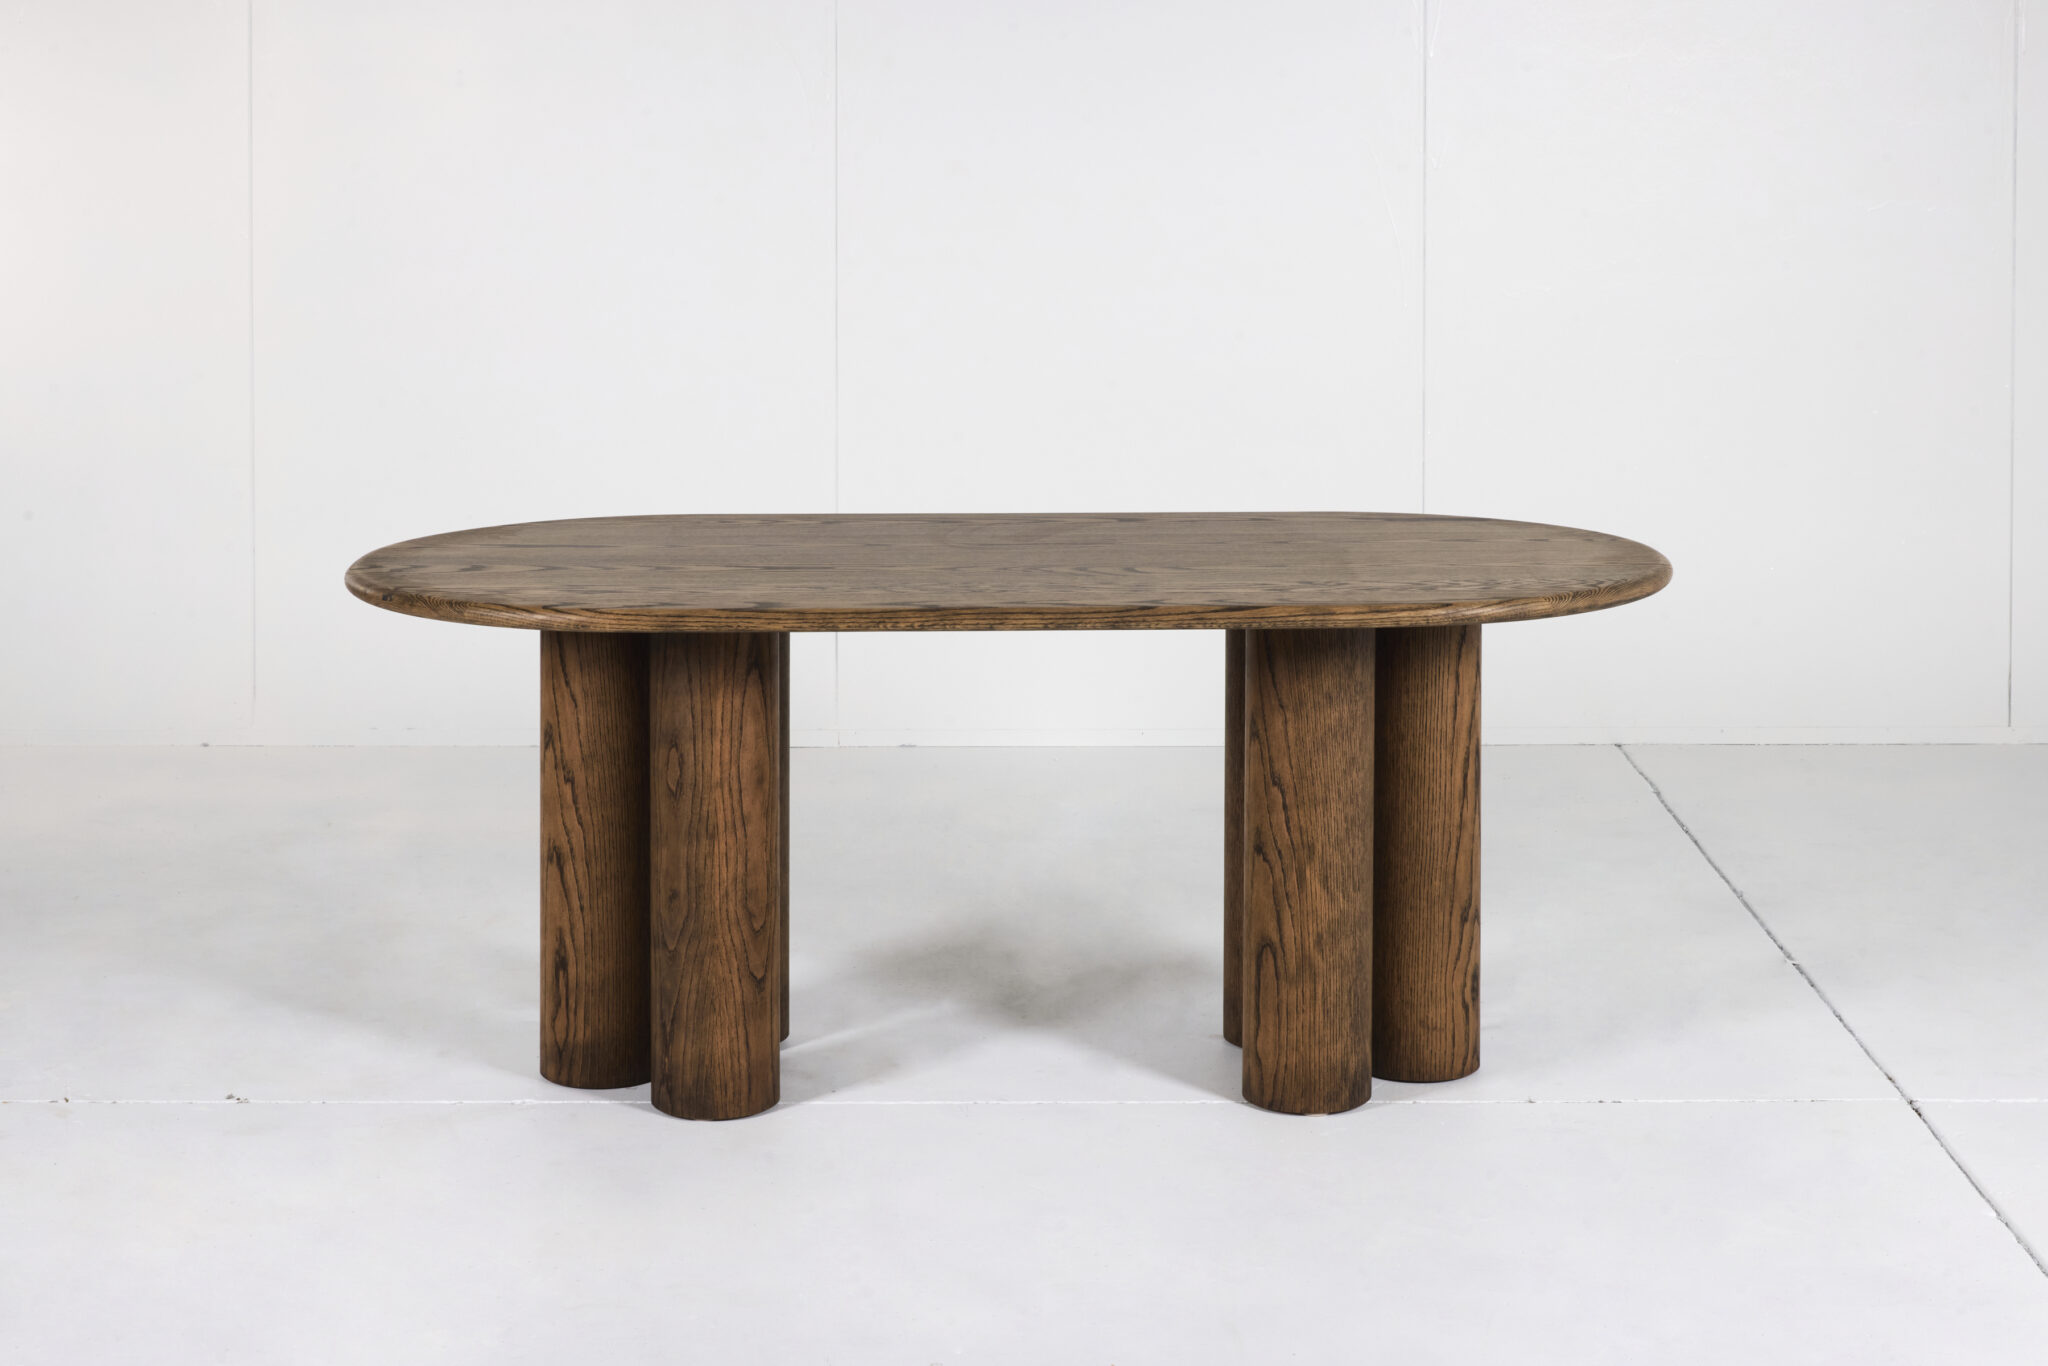 Pillar Dining Table crafted from premium timber with a sleek pencil edge and sturdy pillar base